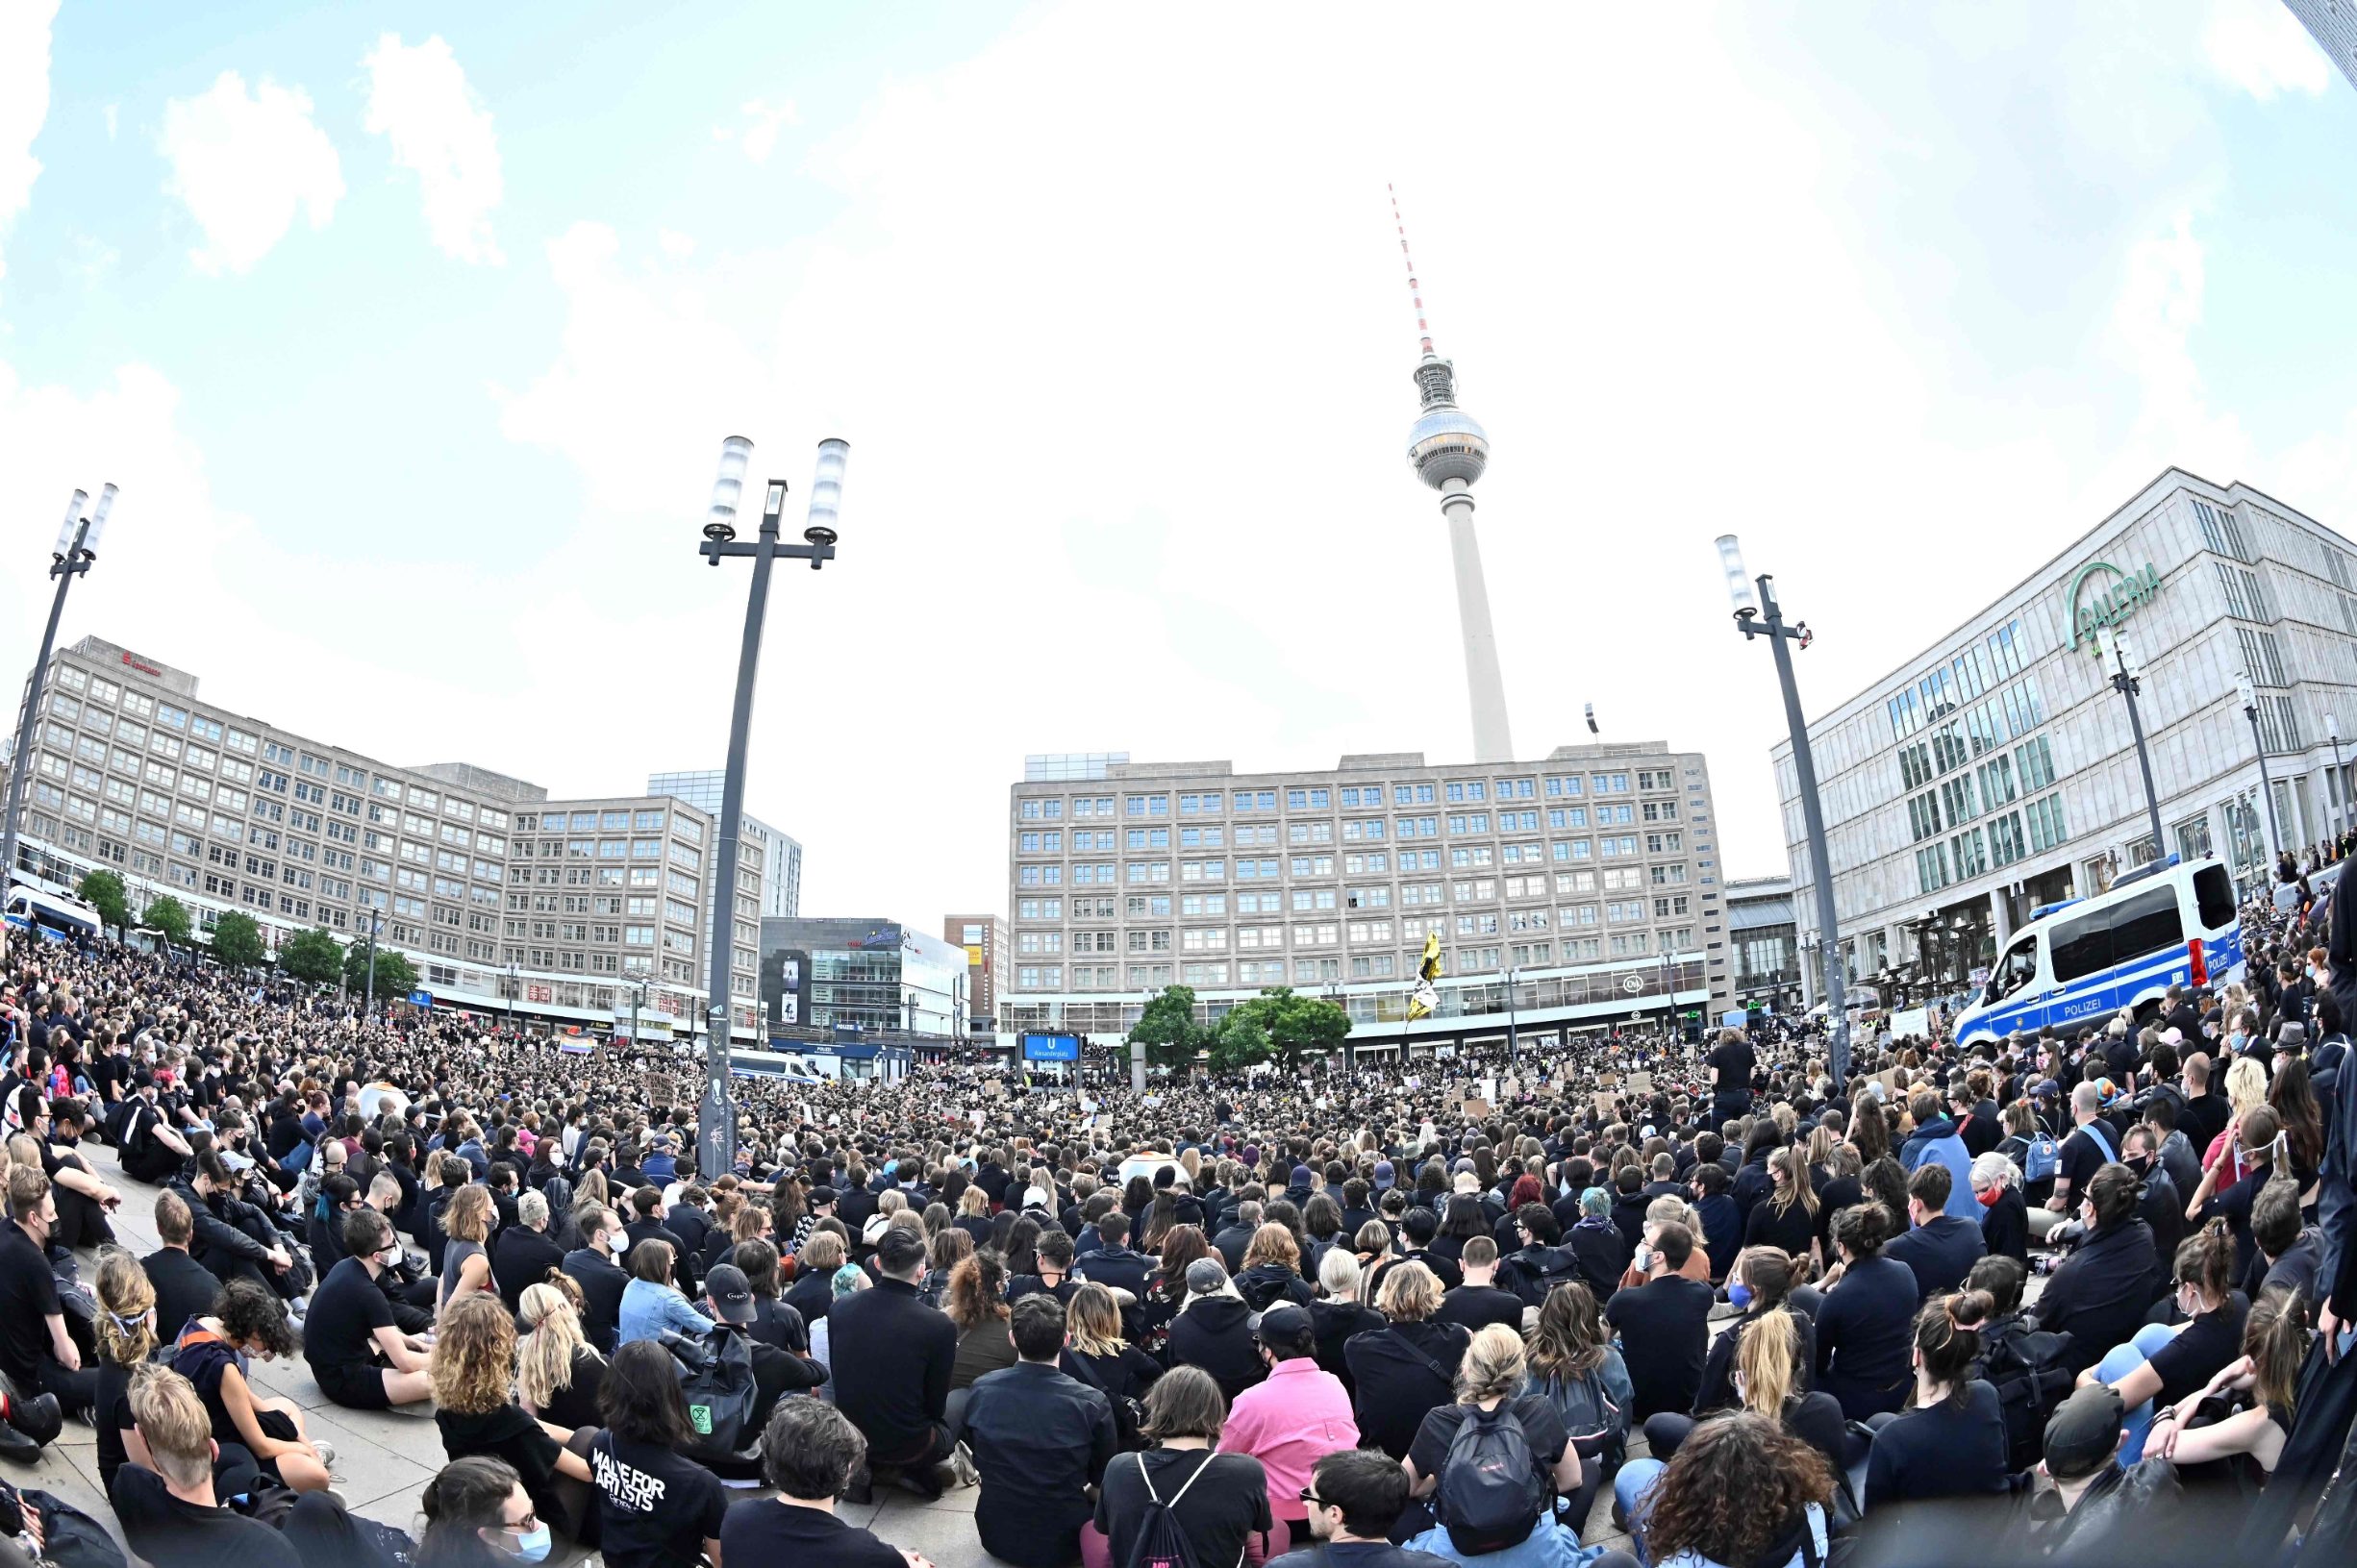 Protesters gather at Alexanderplatz square during a demonstration in solidarity with protests raging across the US over the death of George Floyd on June 6, 2020 in Berlin. - The death during the arrest of George Floyd, an unarmed black man in the US state of Minnesota, has brought tens of thousands out onto the streets during a pandemic that is ebbing in Asia and Europe, but spreading in other parts of the world. (Photo by Tobias SCHWARZ / AFP)